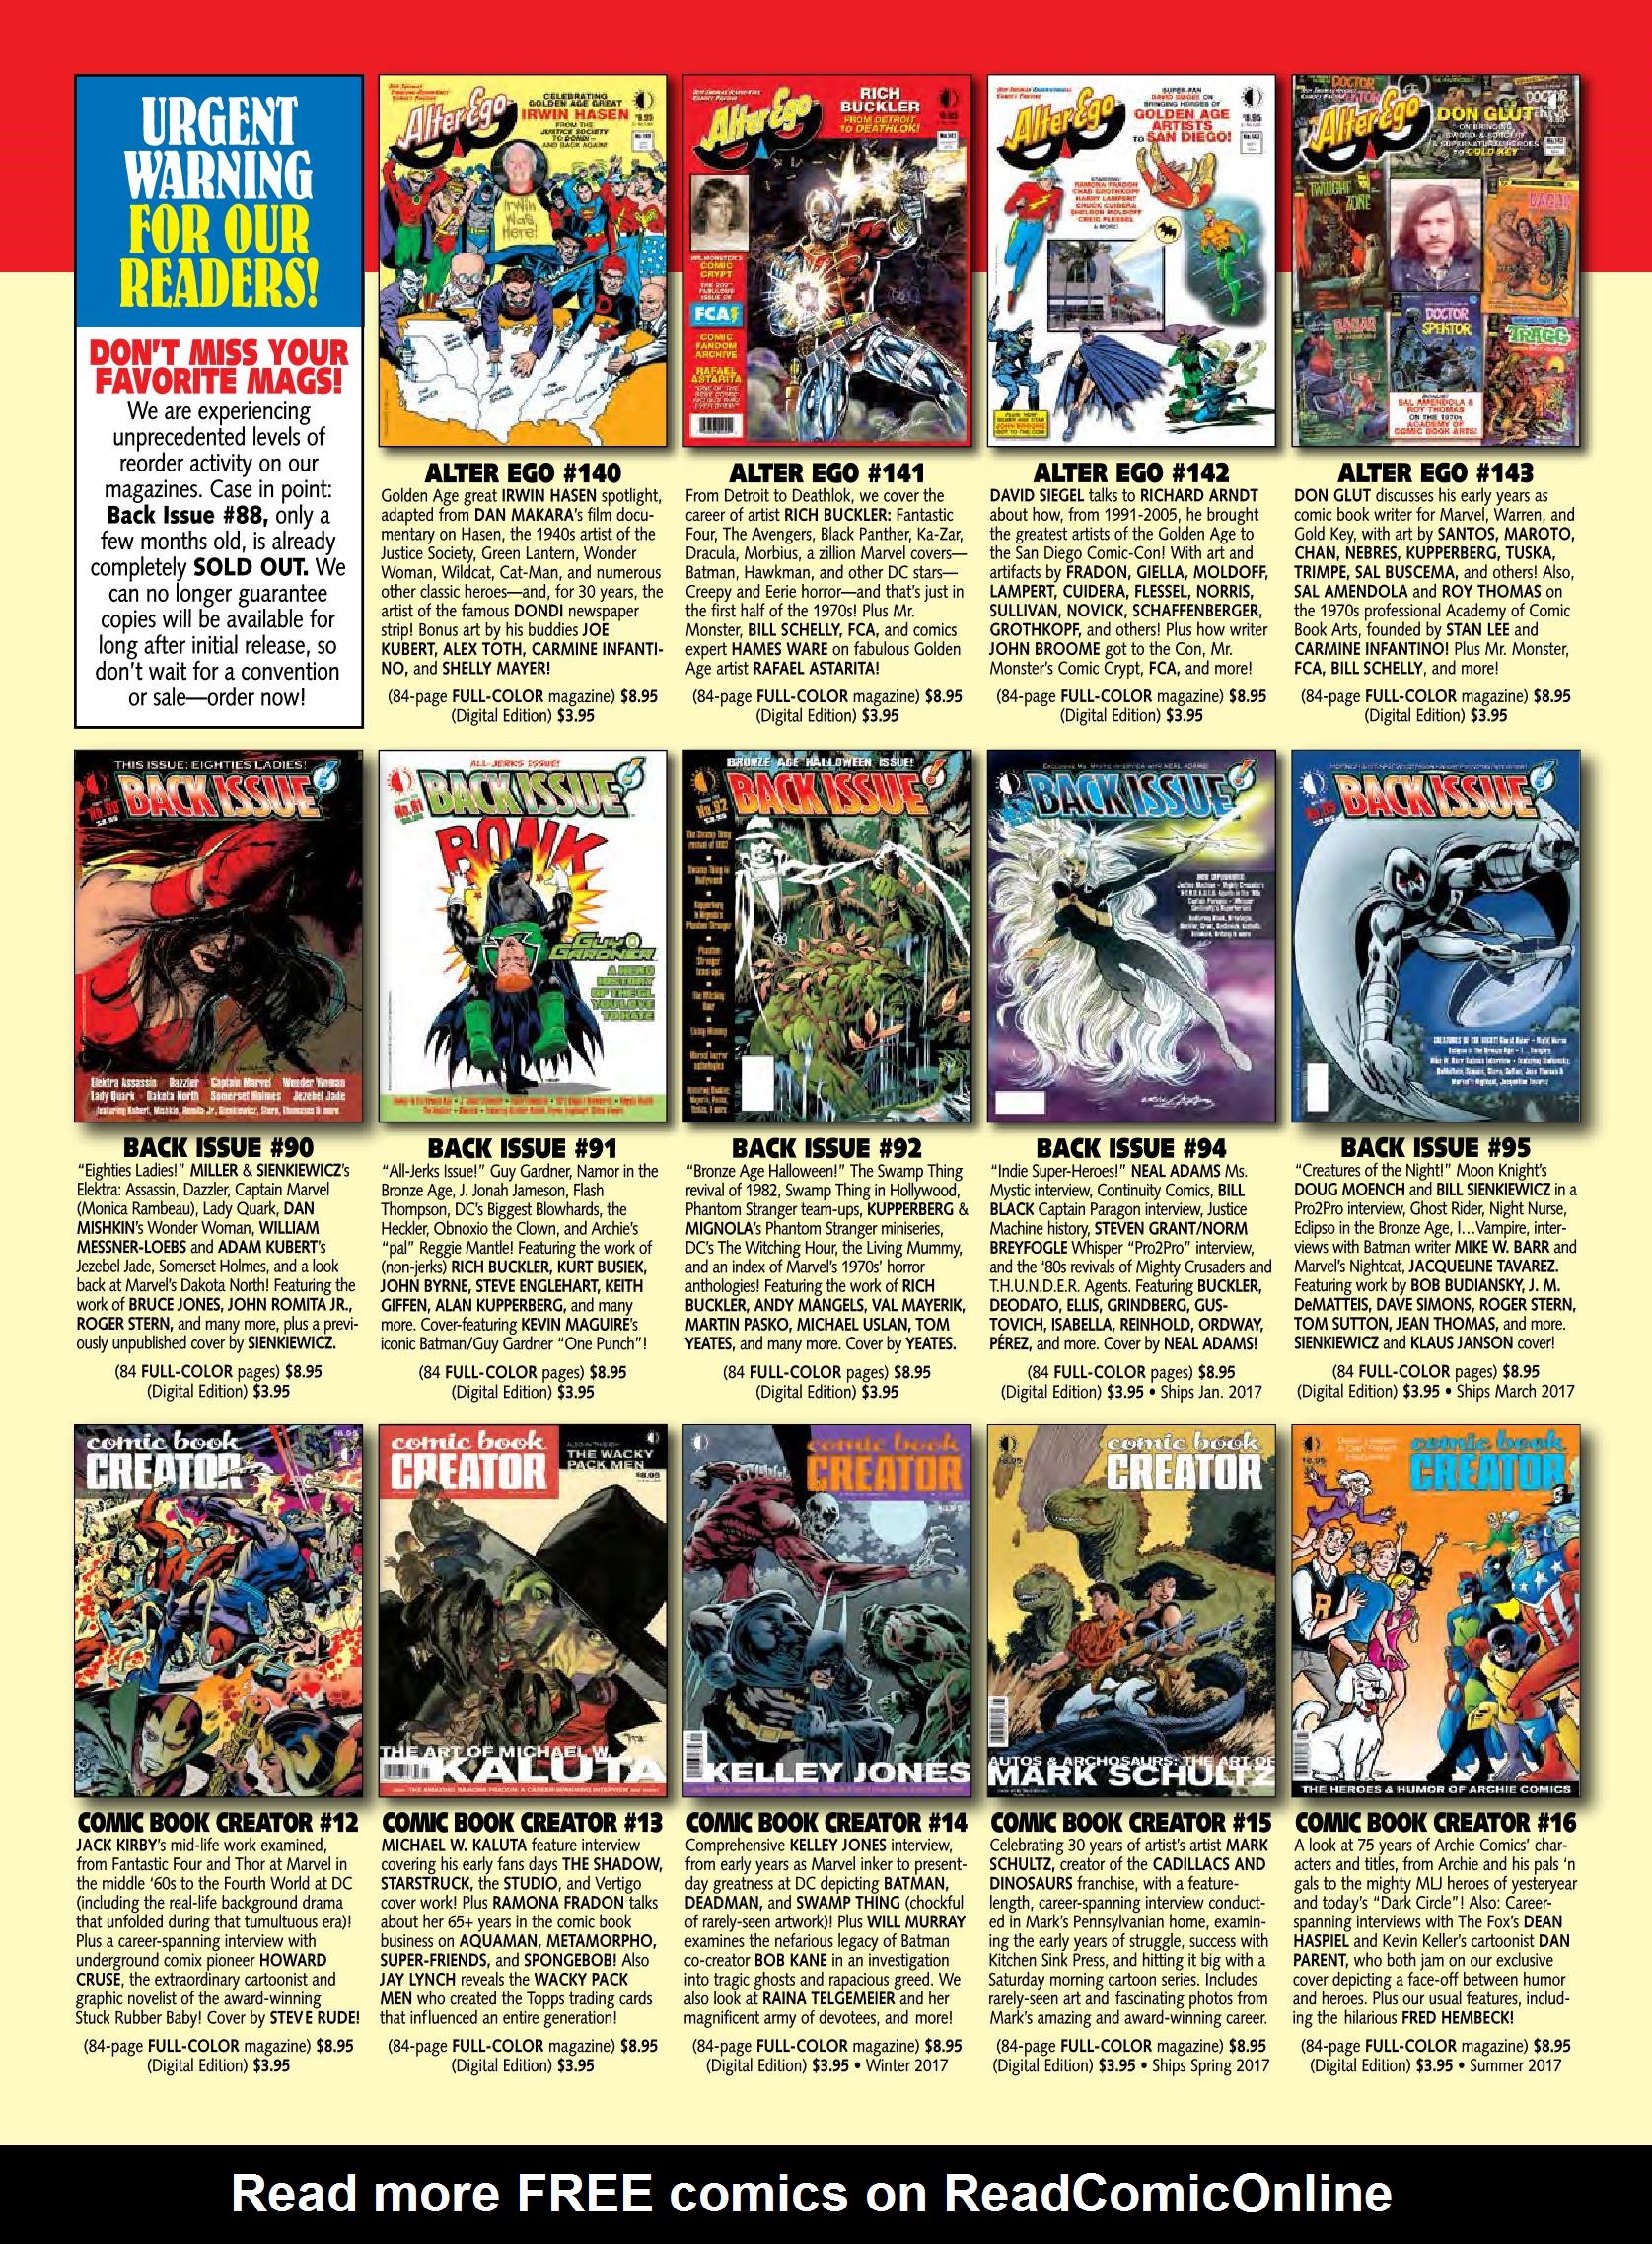 Read online Back Issue comic -  Issue #93 - 81